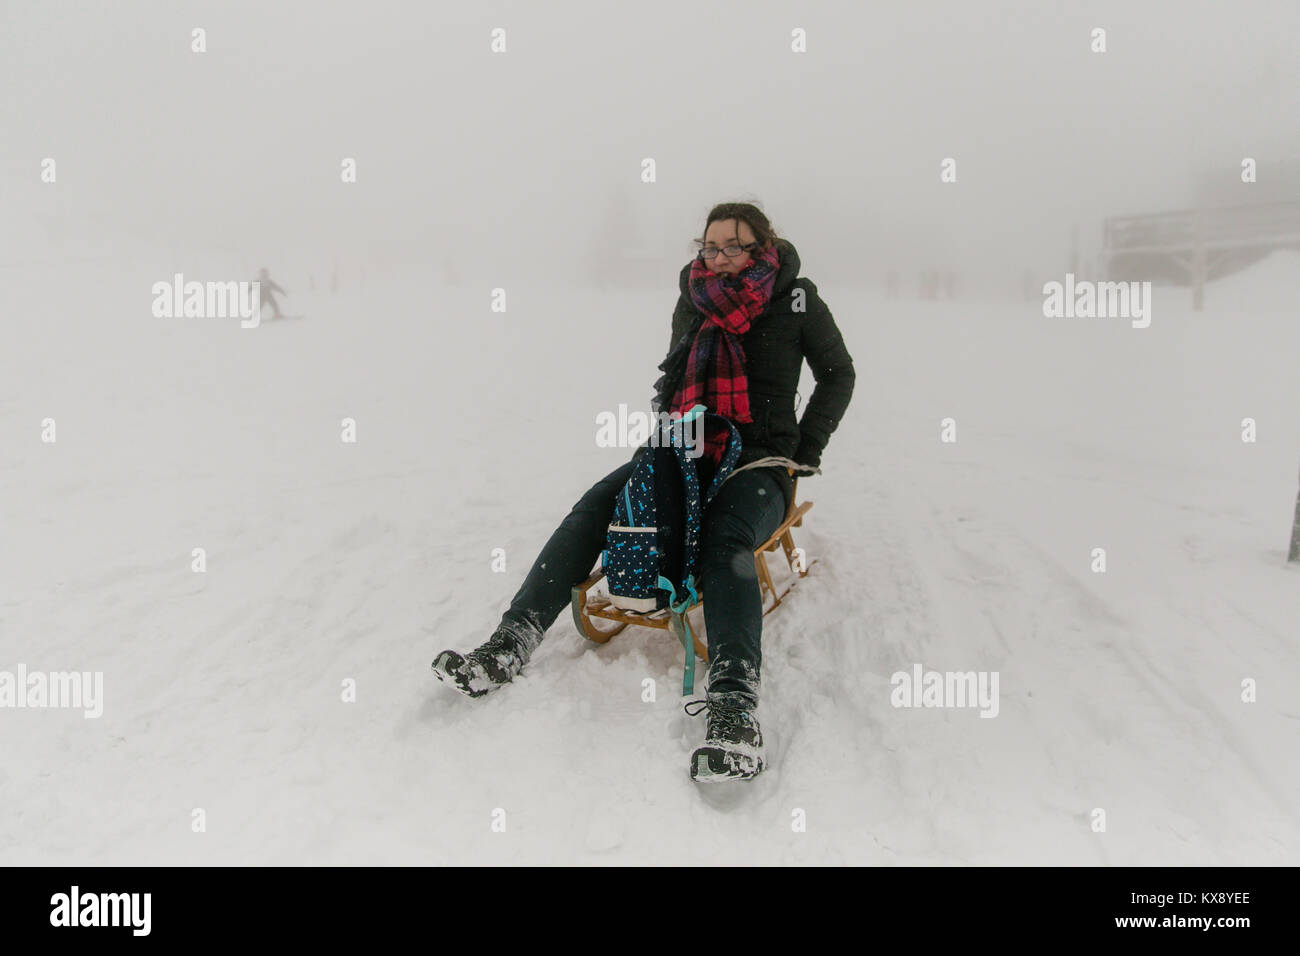 Girl having fun trying to ride on a sledge at the misty and covered in snow summit of Skrzyczne mountain in Poland Stock Photo